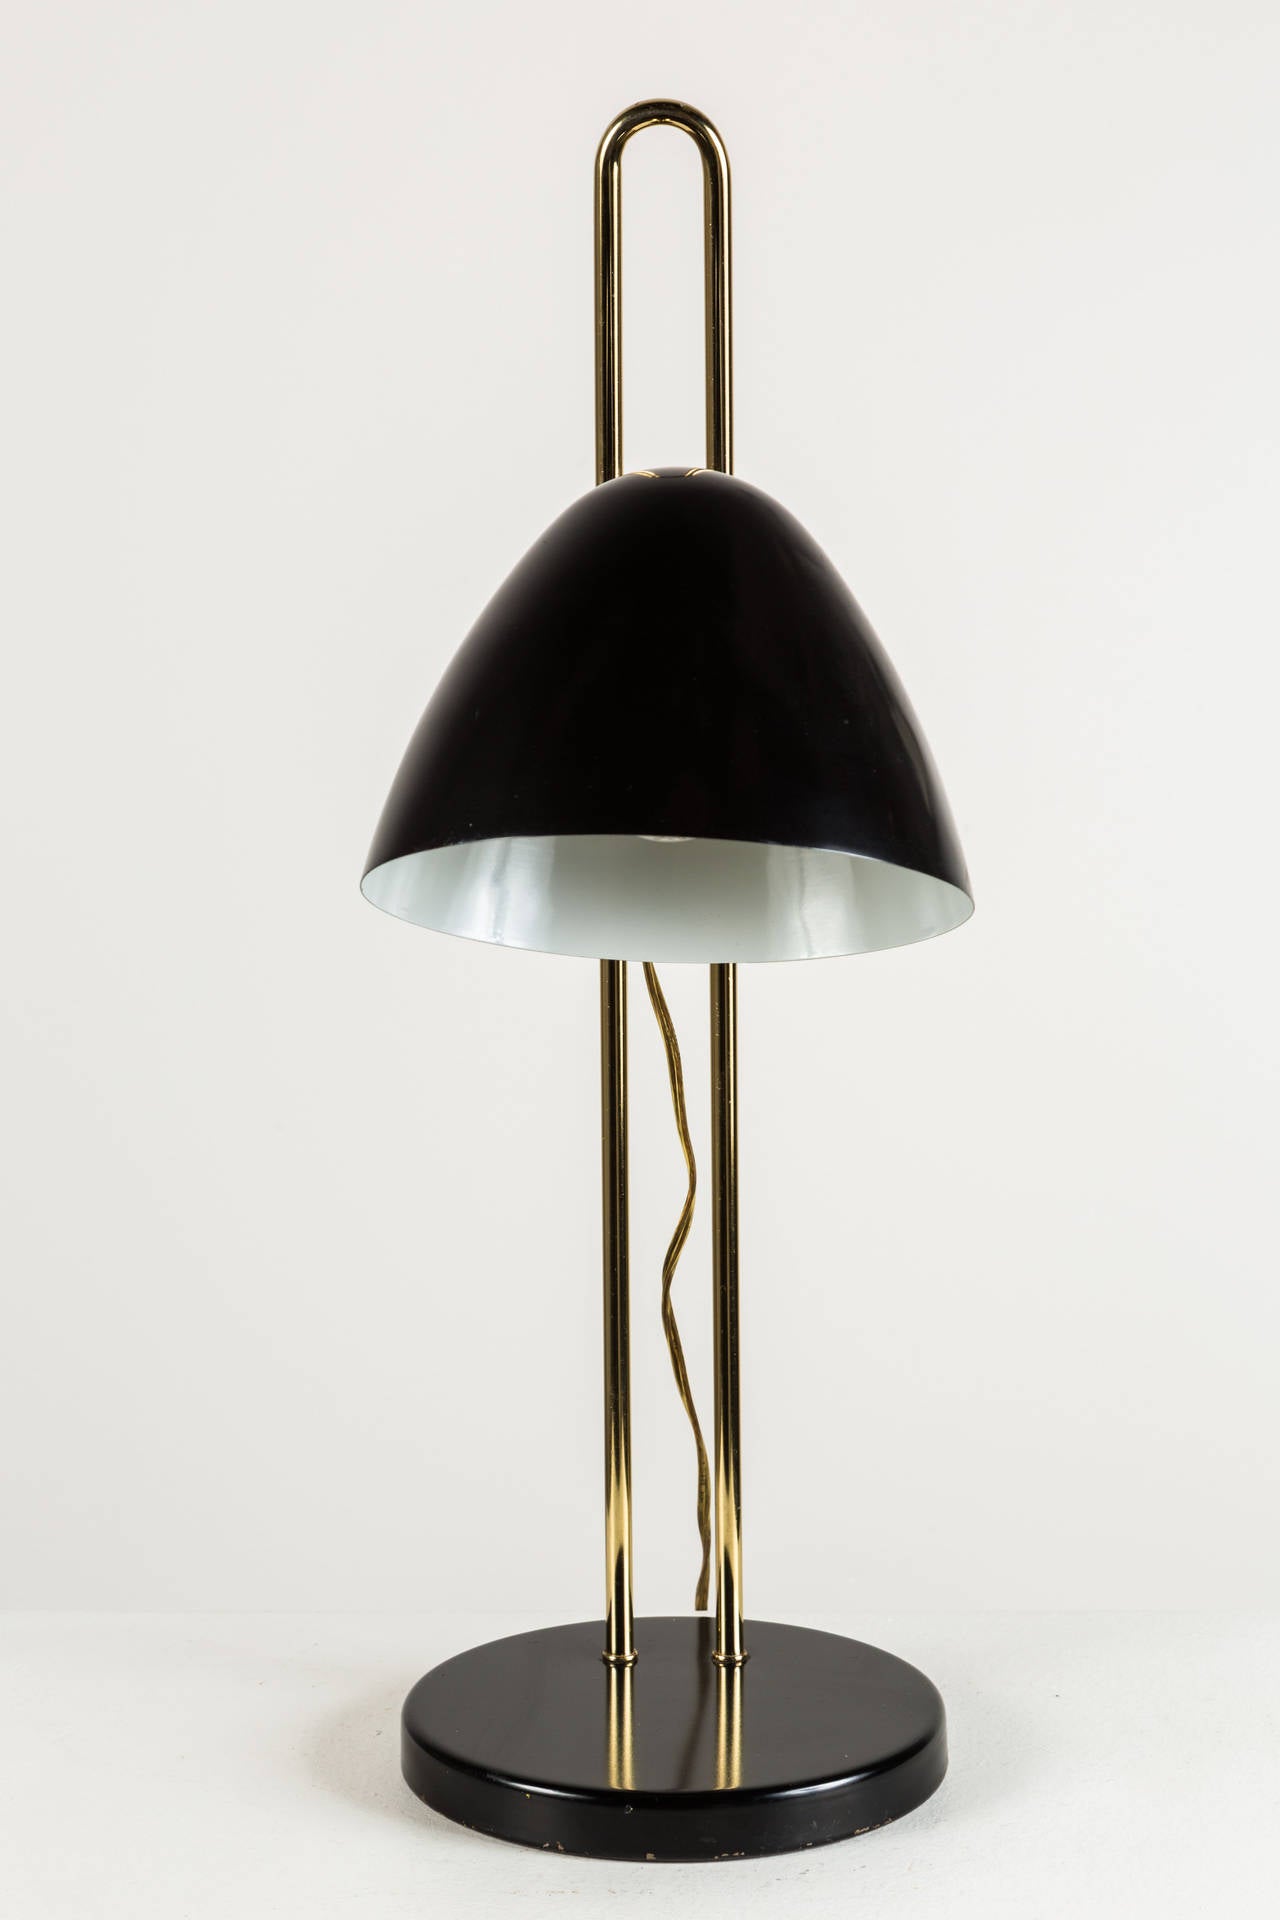 Brass adjustable height table lamp with fully pivoting shade